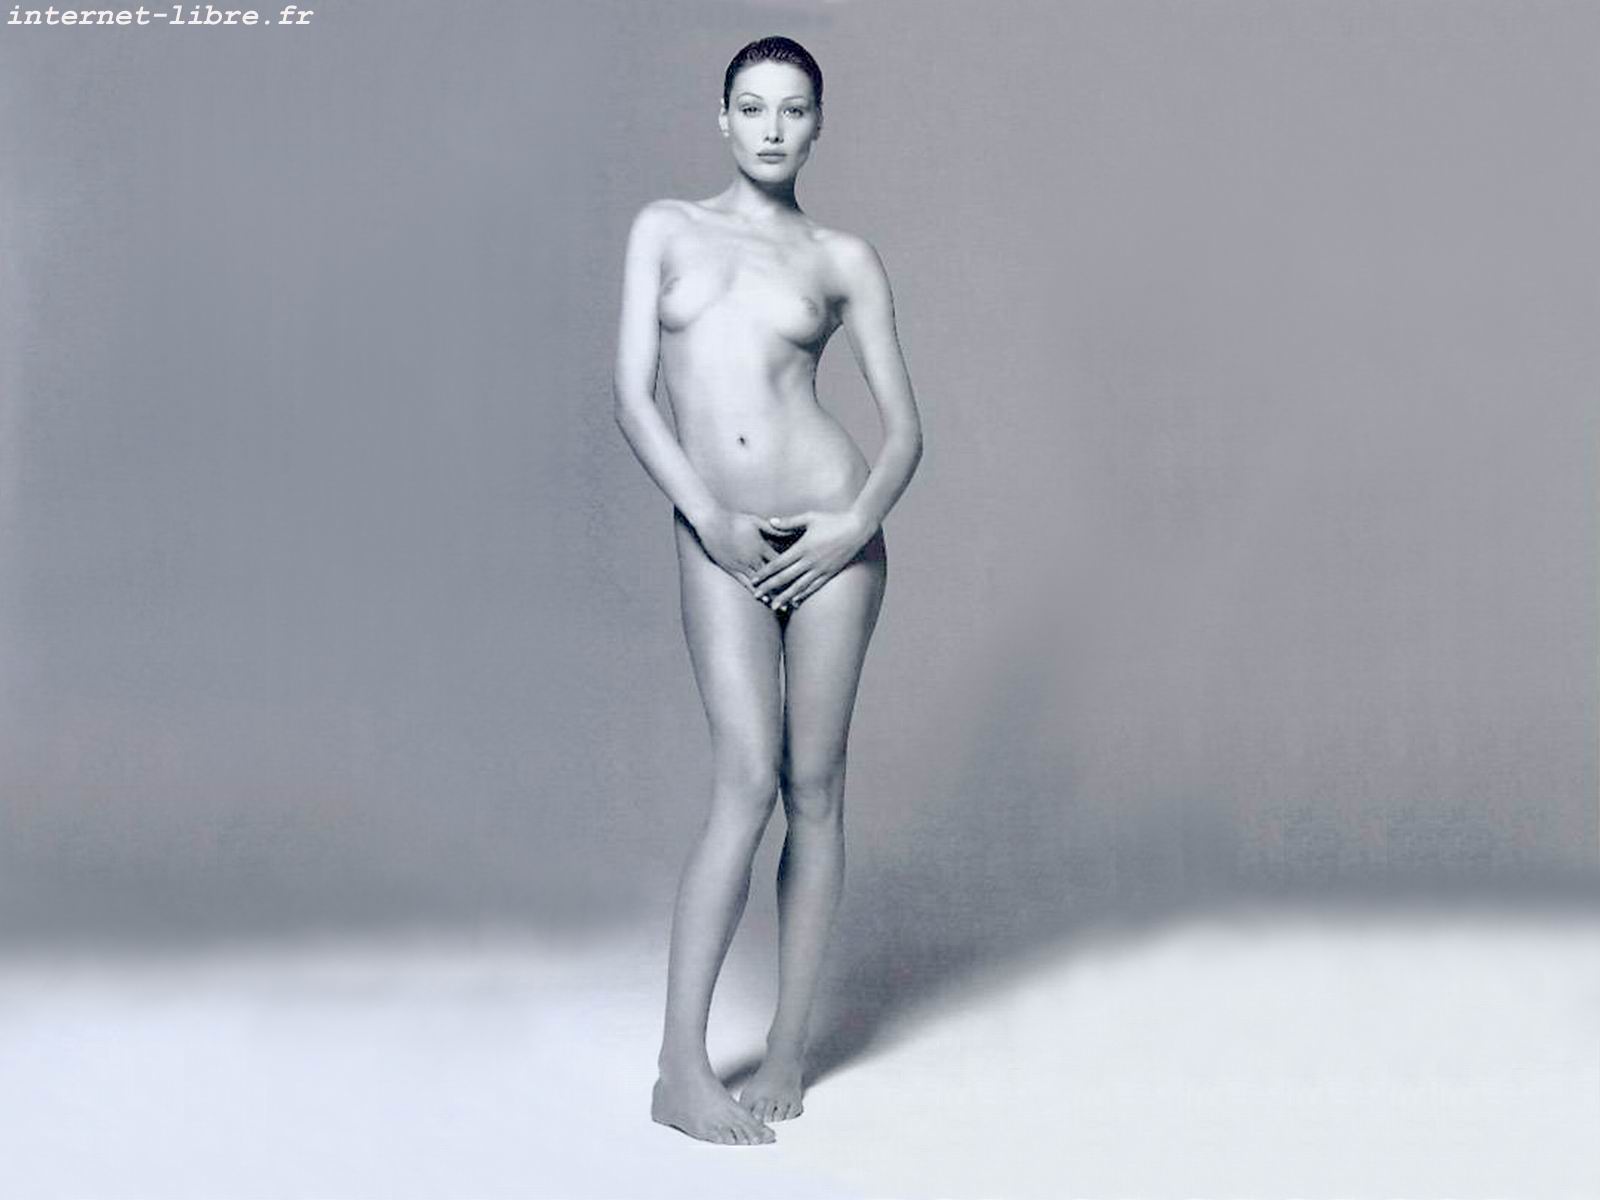 France's first lady to go naked